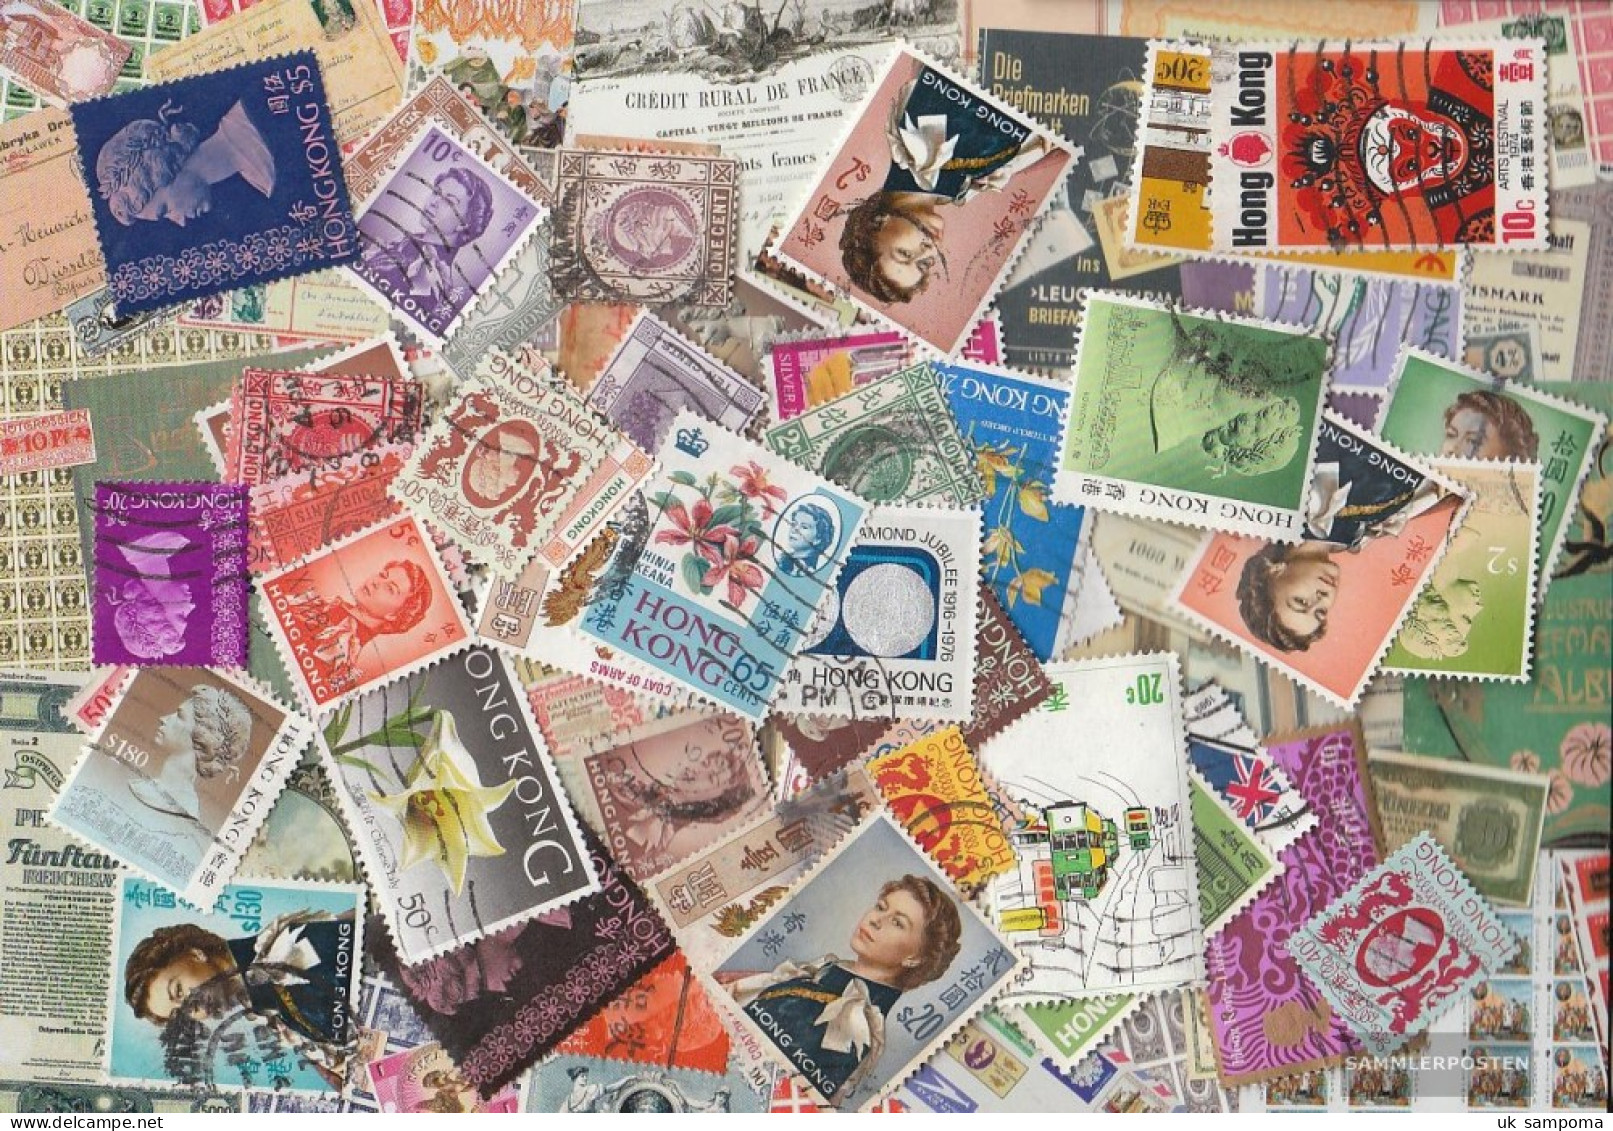 Hong Kong 100 Different Stamps - Lots & Serien